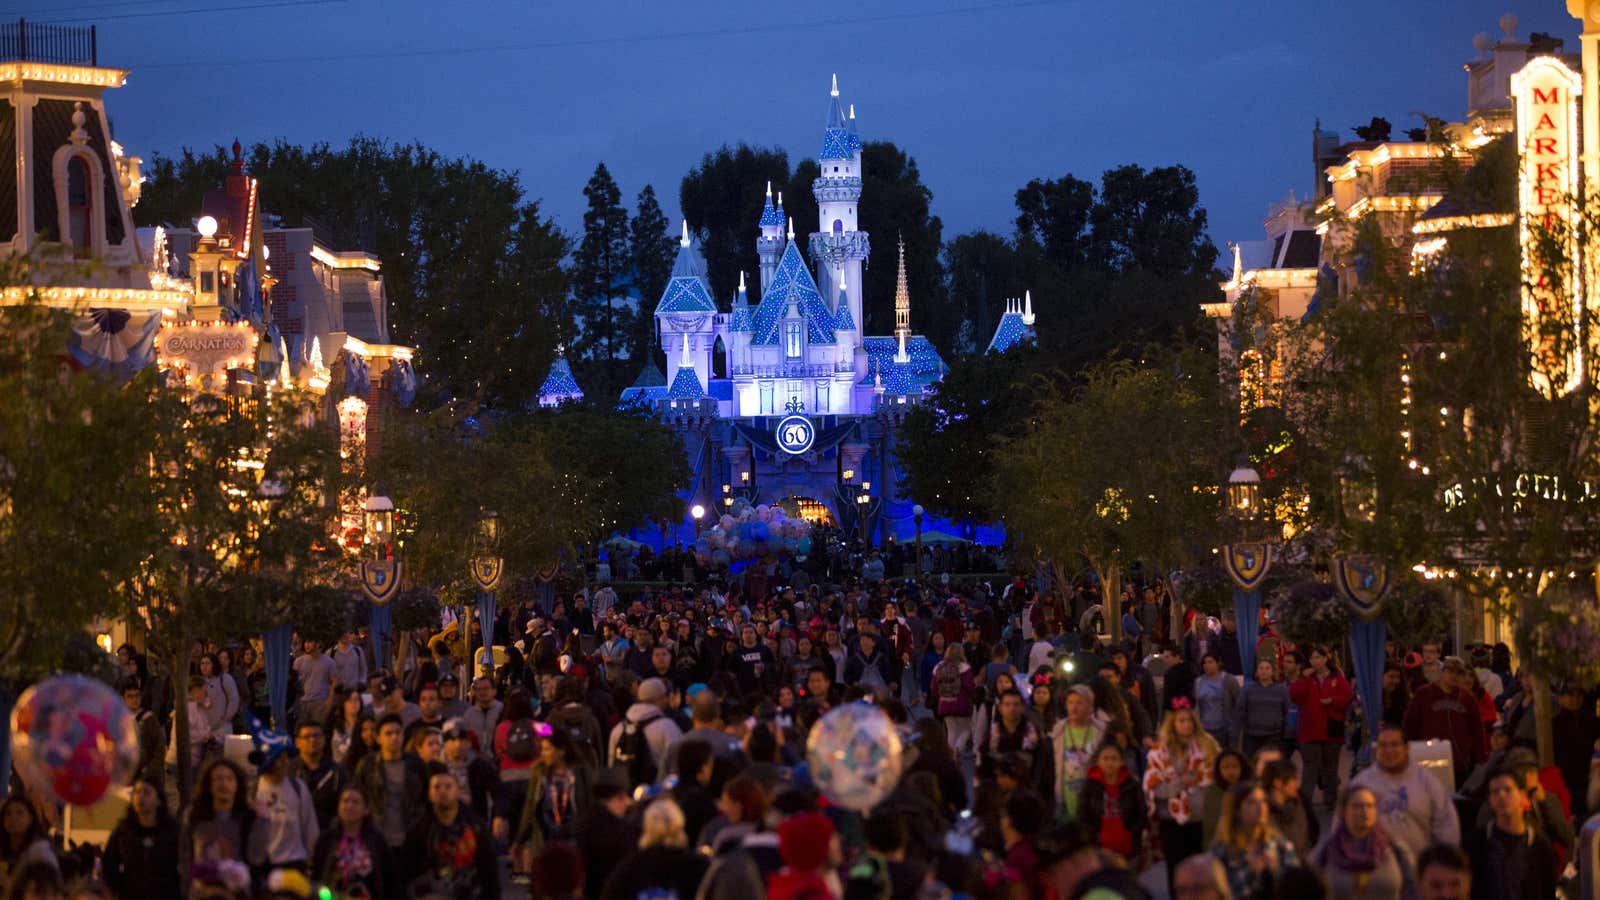 The most magical place on Earth gets a much-needed update.